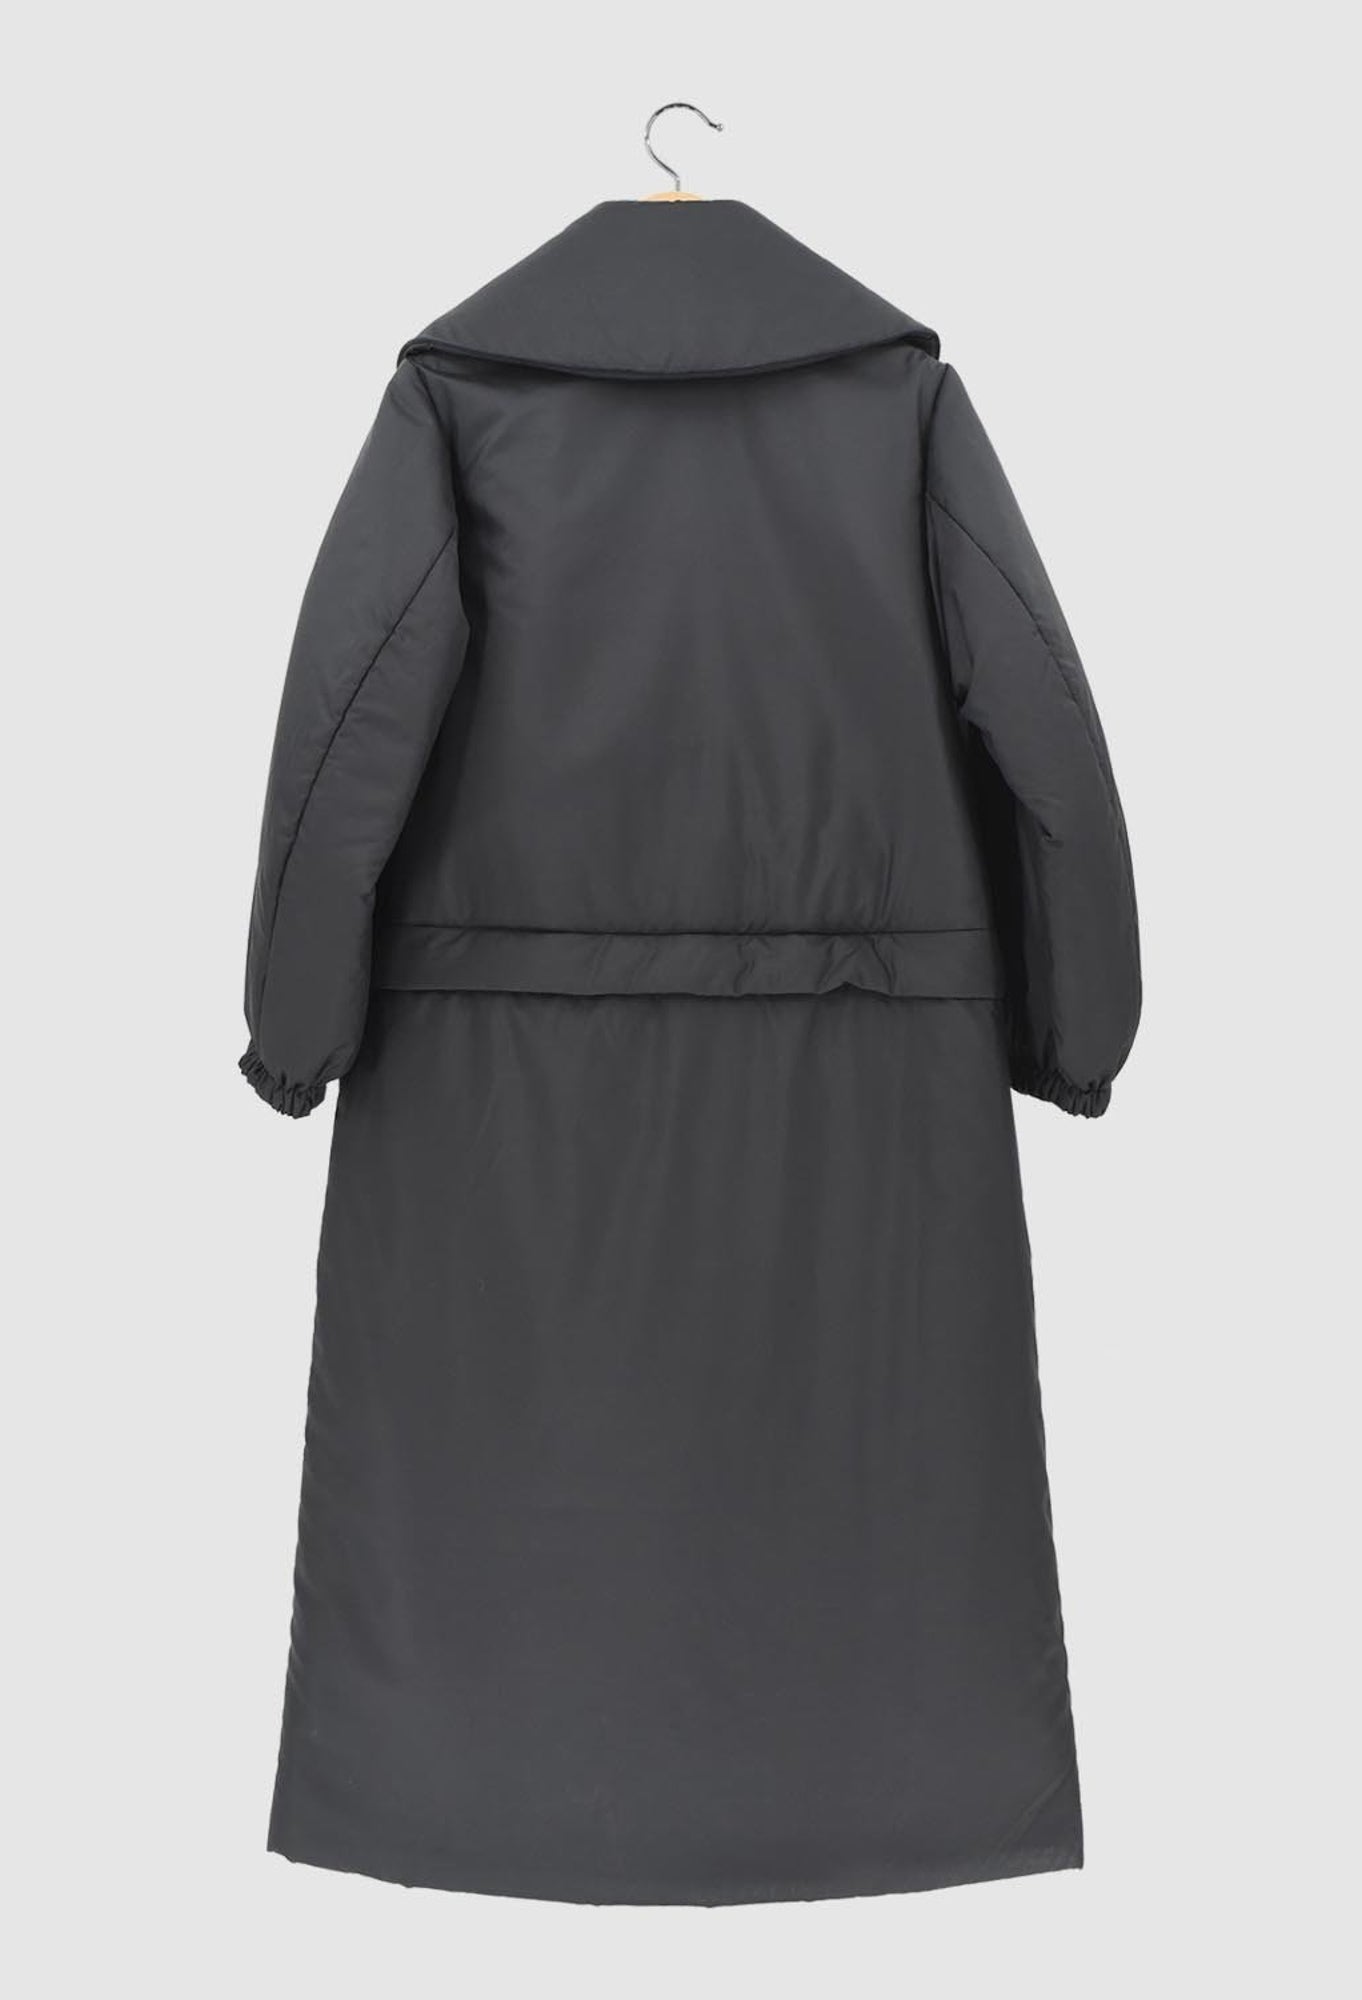 WENDELINE - ECO DOWN Coat in Black with Cloud Lining